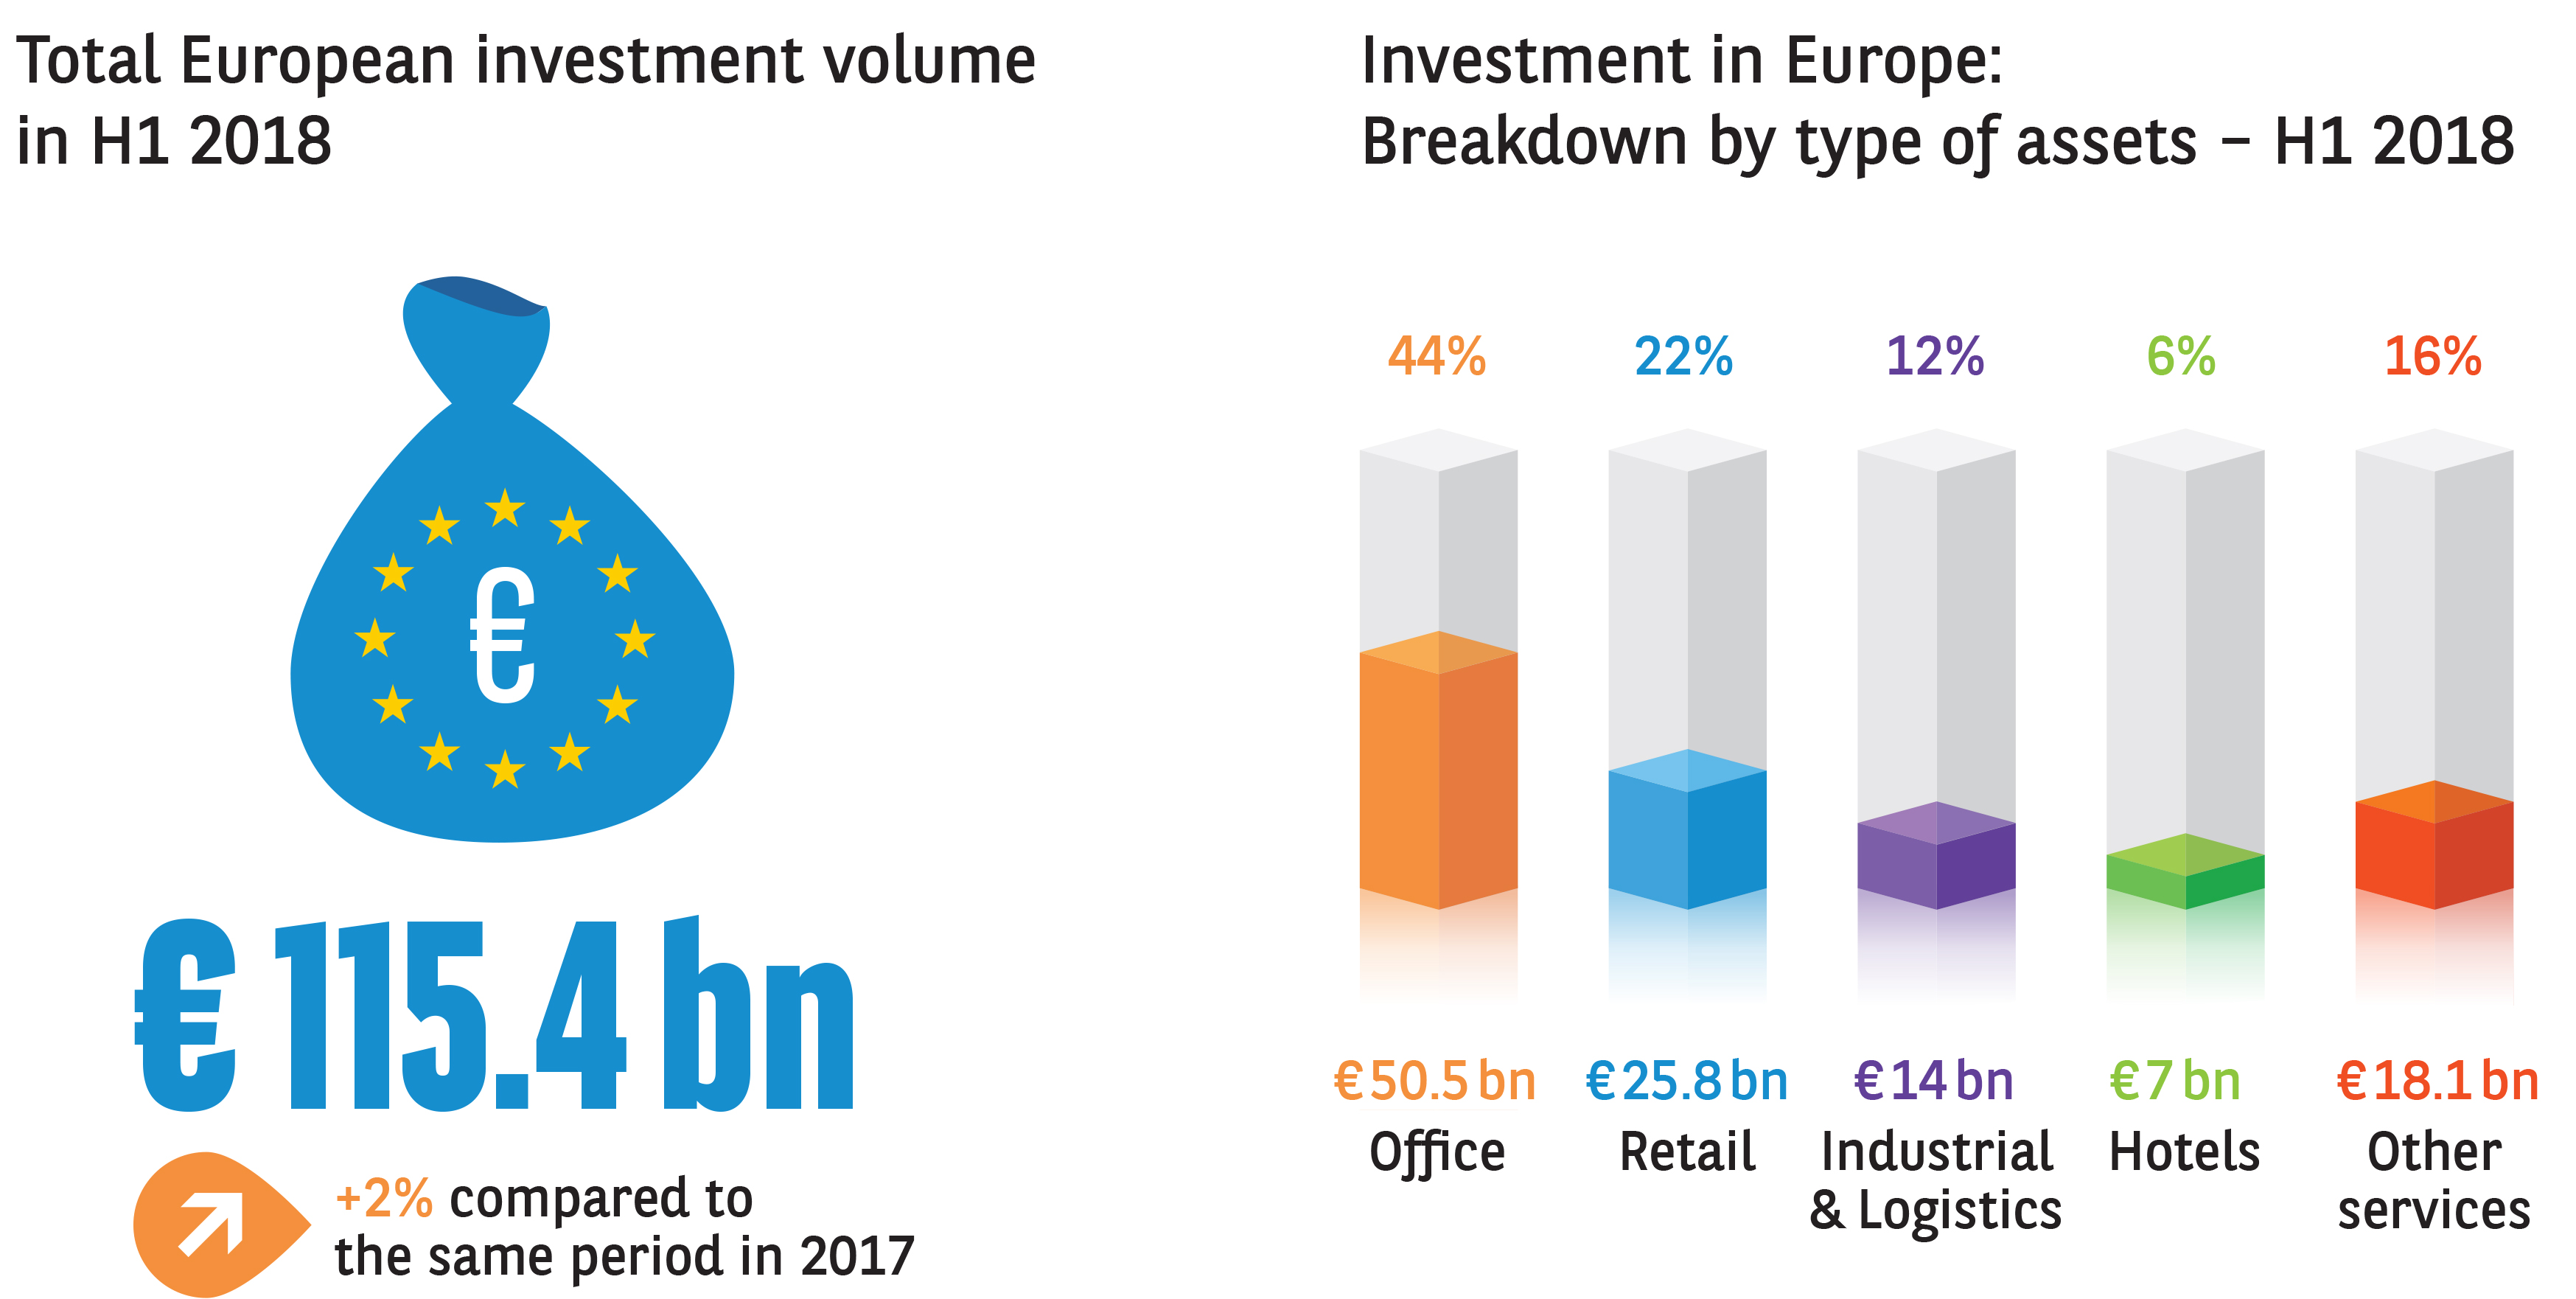 INVESTMENT IN EUROPE H1 2018